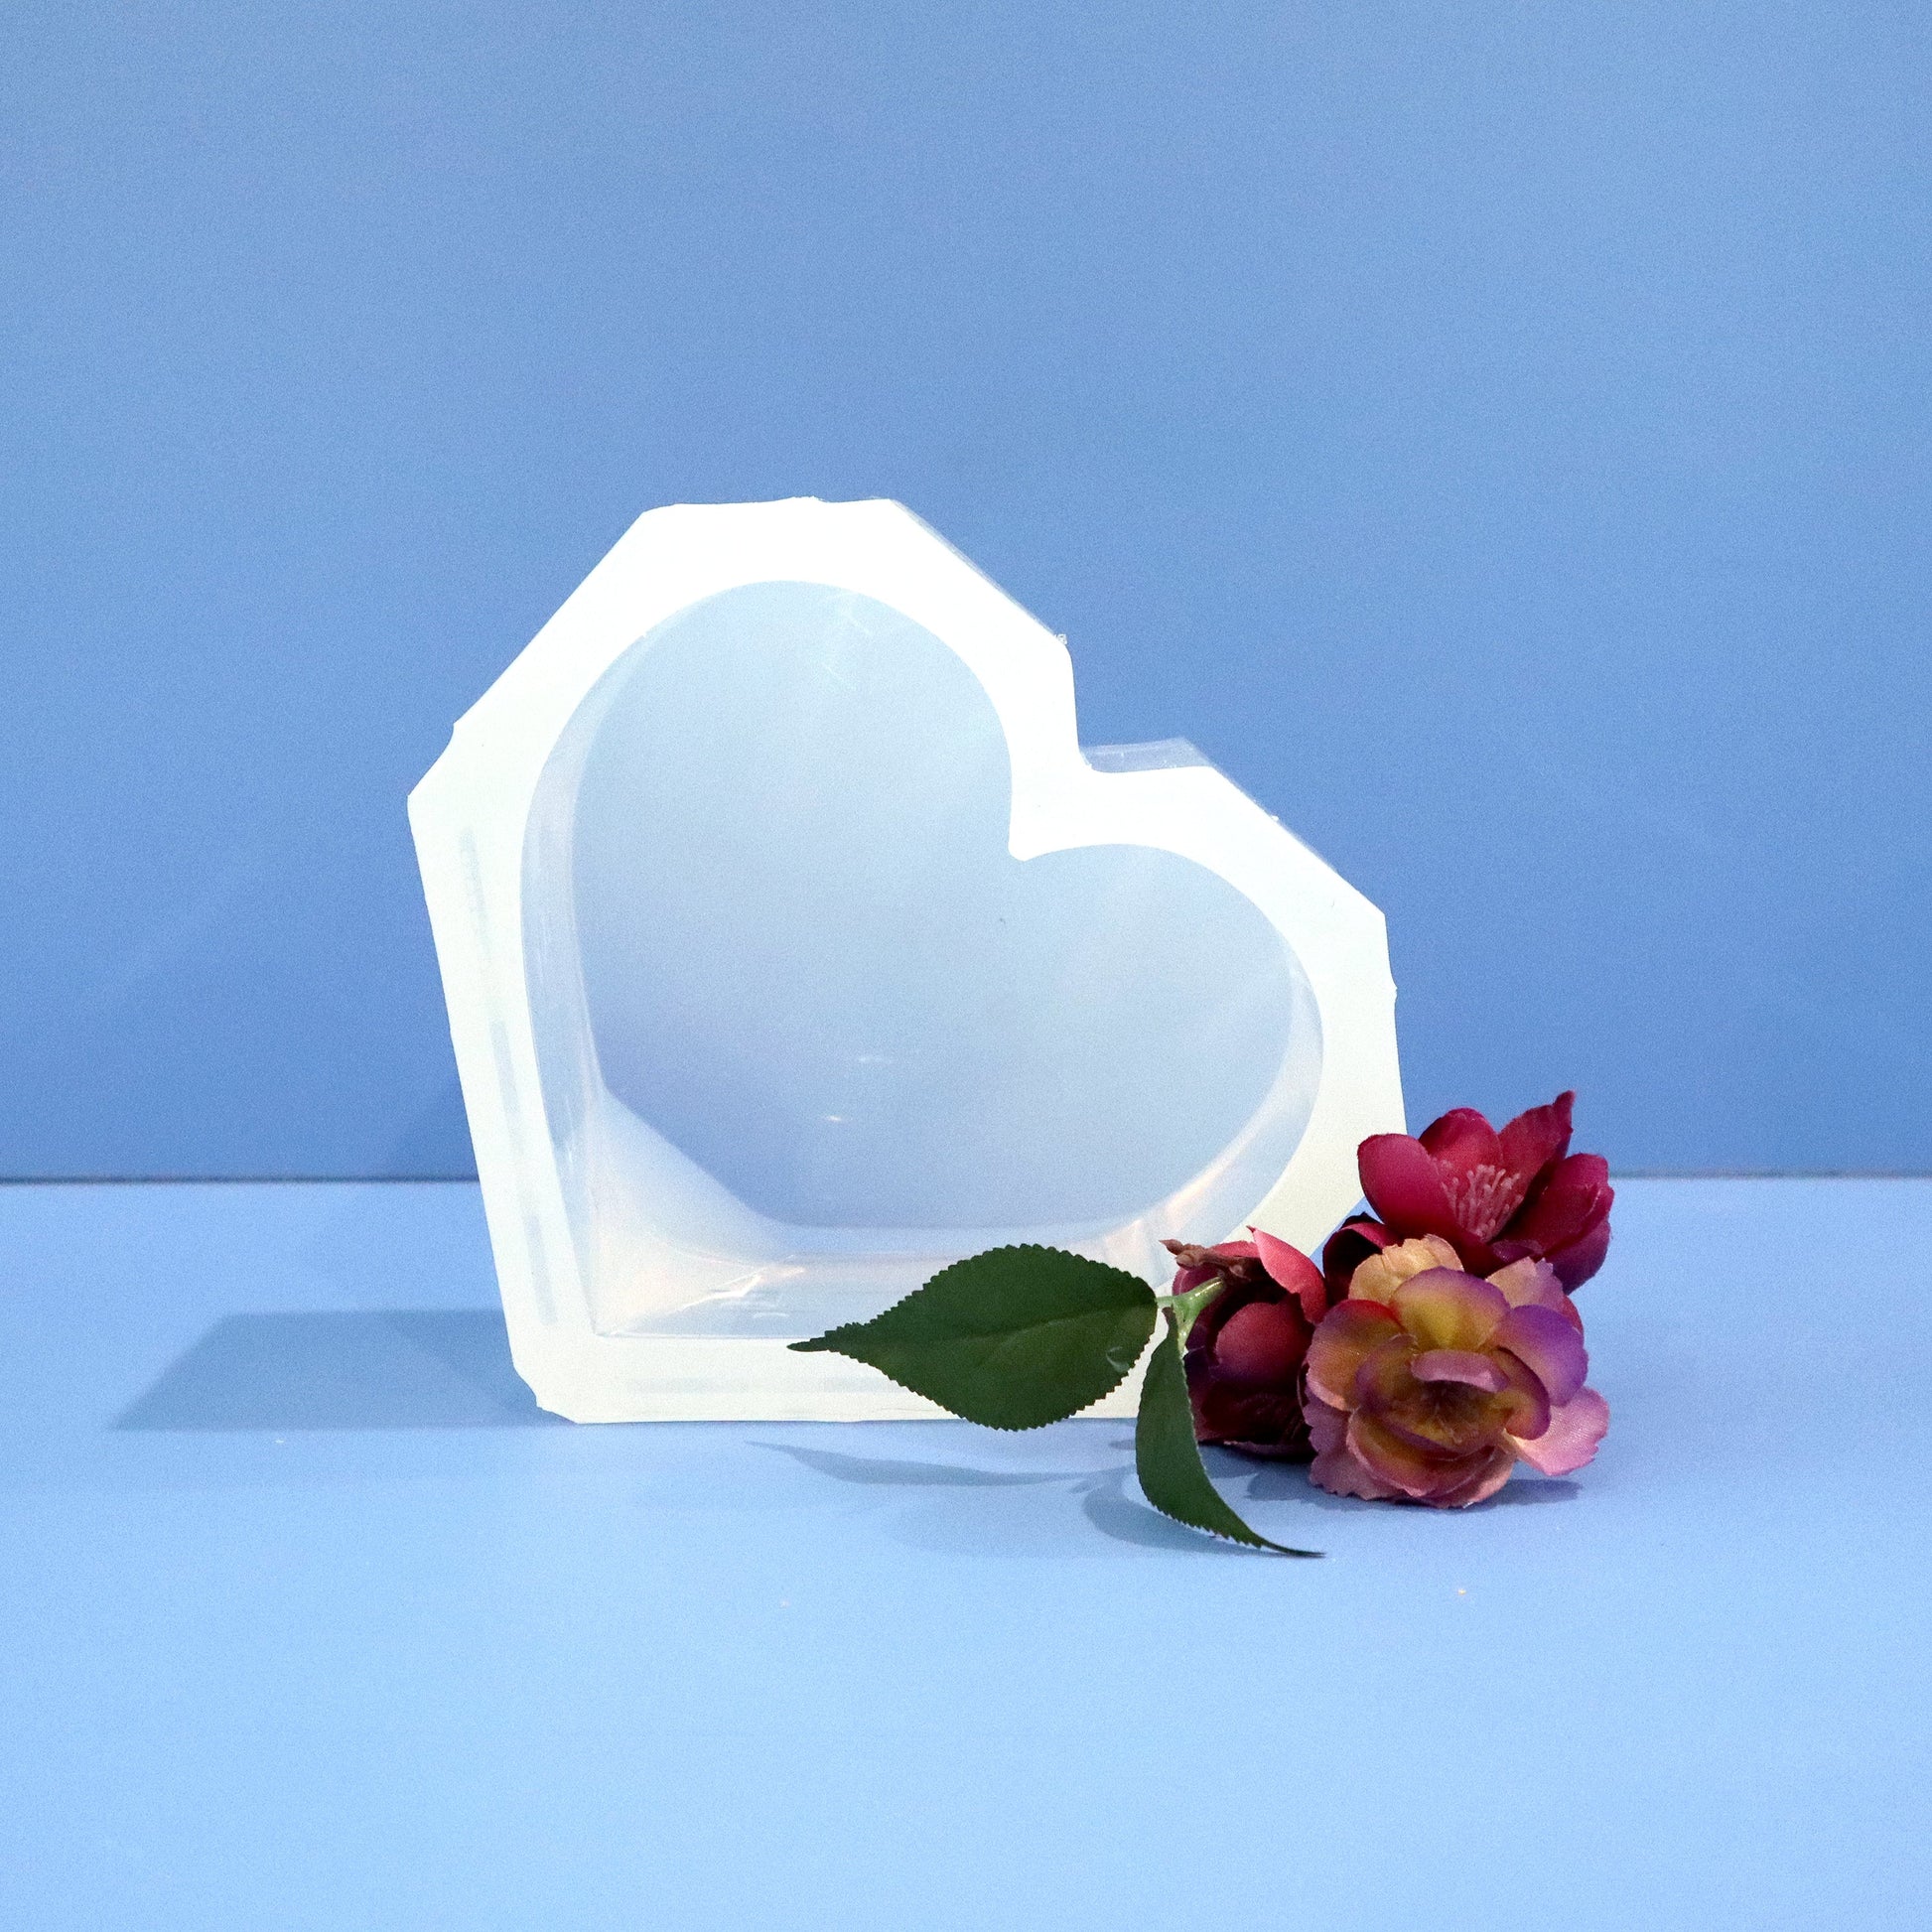 5 Standing Silicone Heart Mold